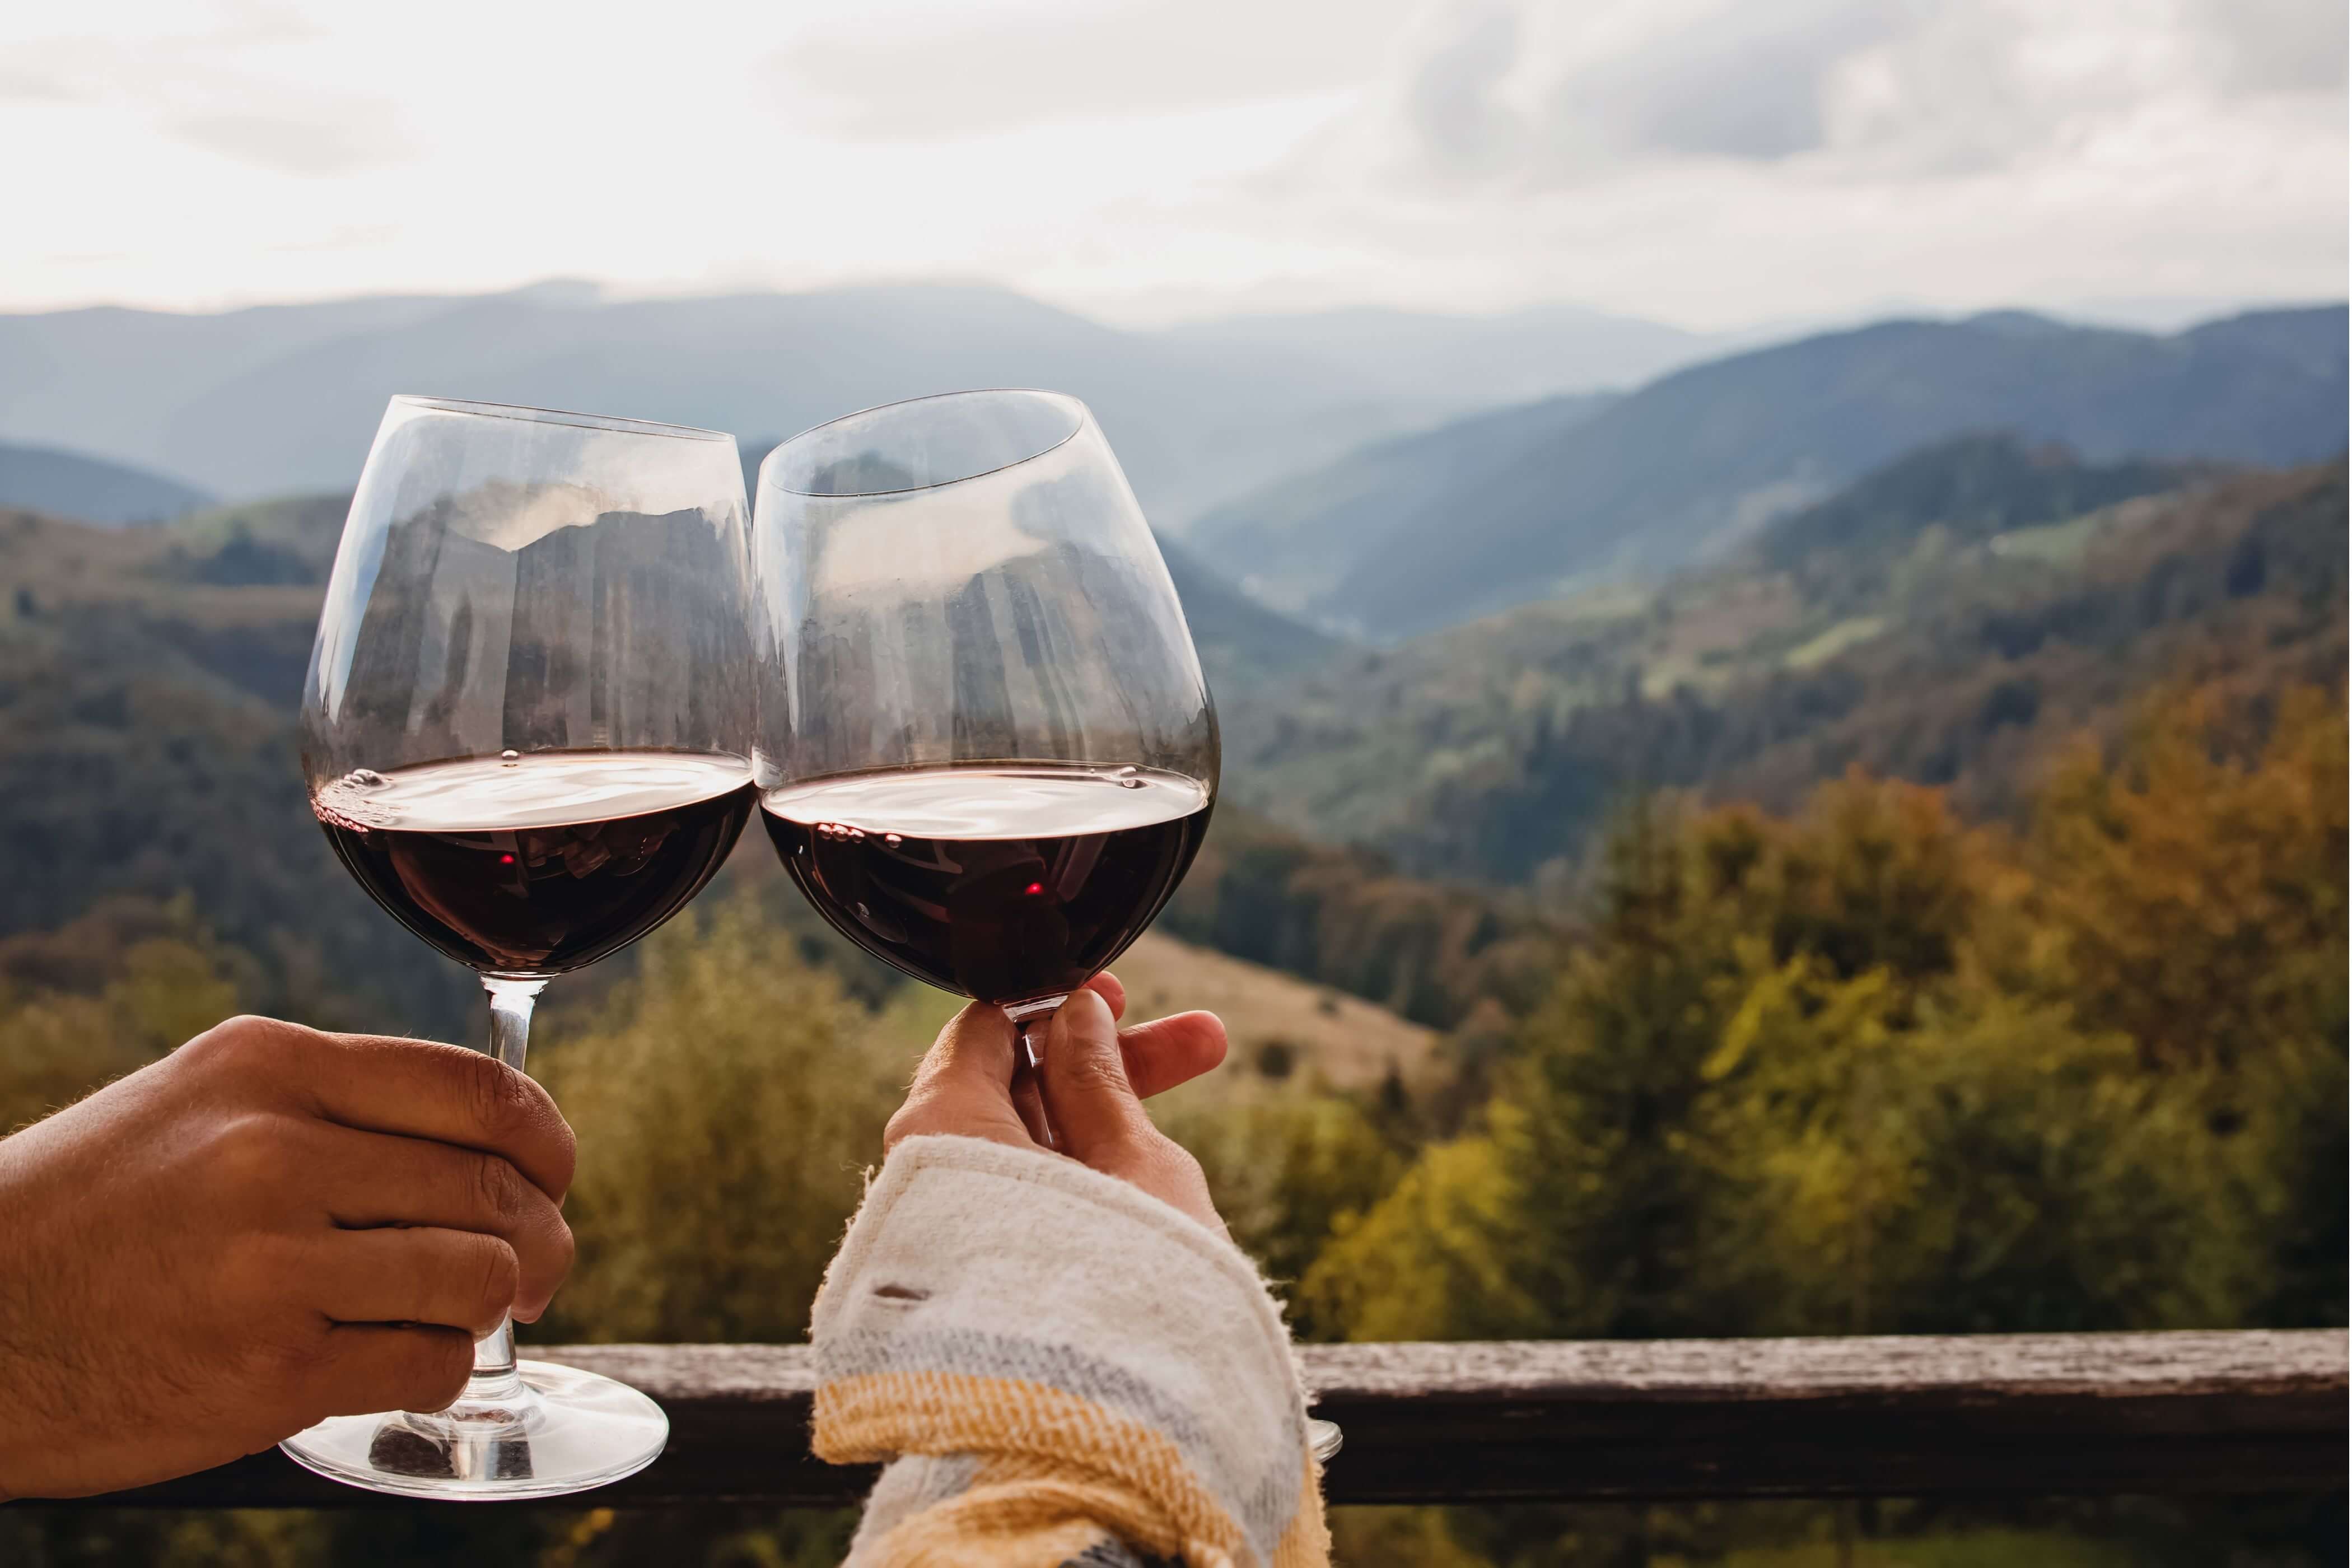 Two people clinking wine glasses with a view of the mountains in the background